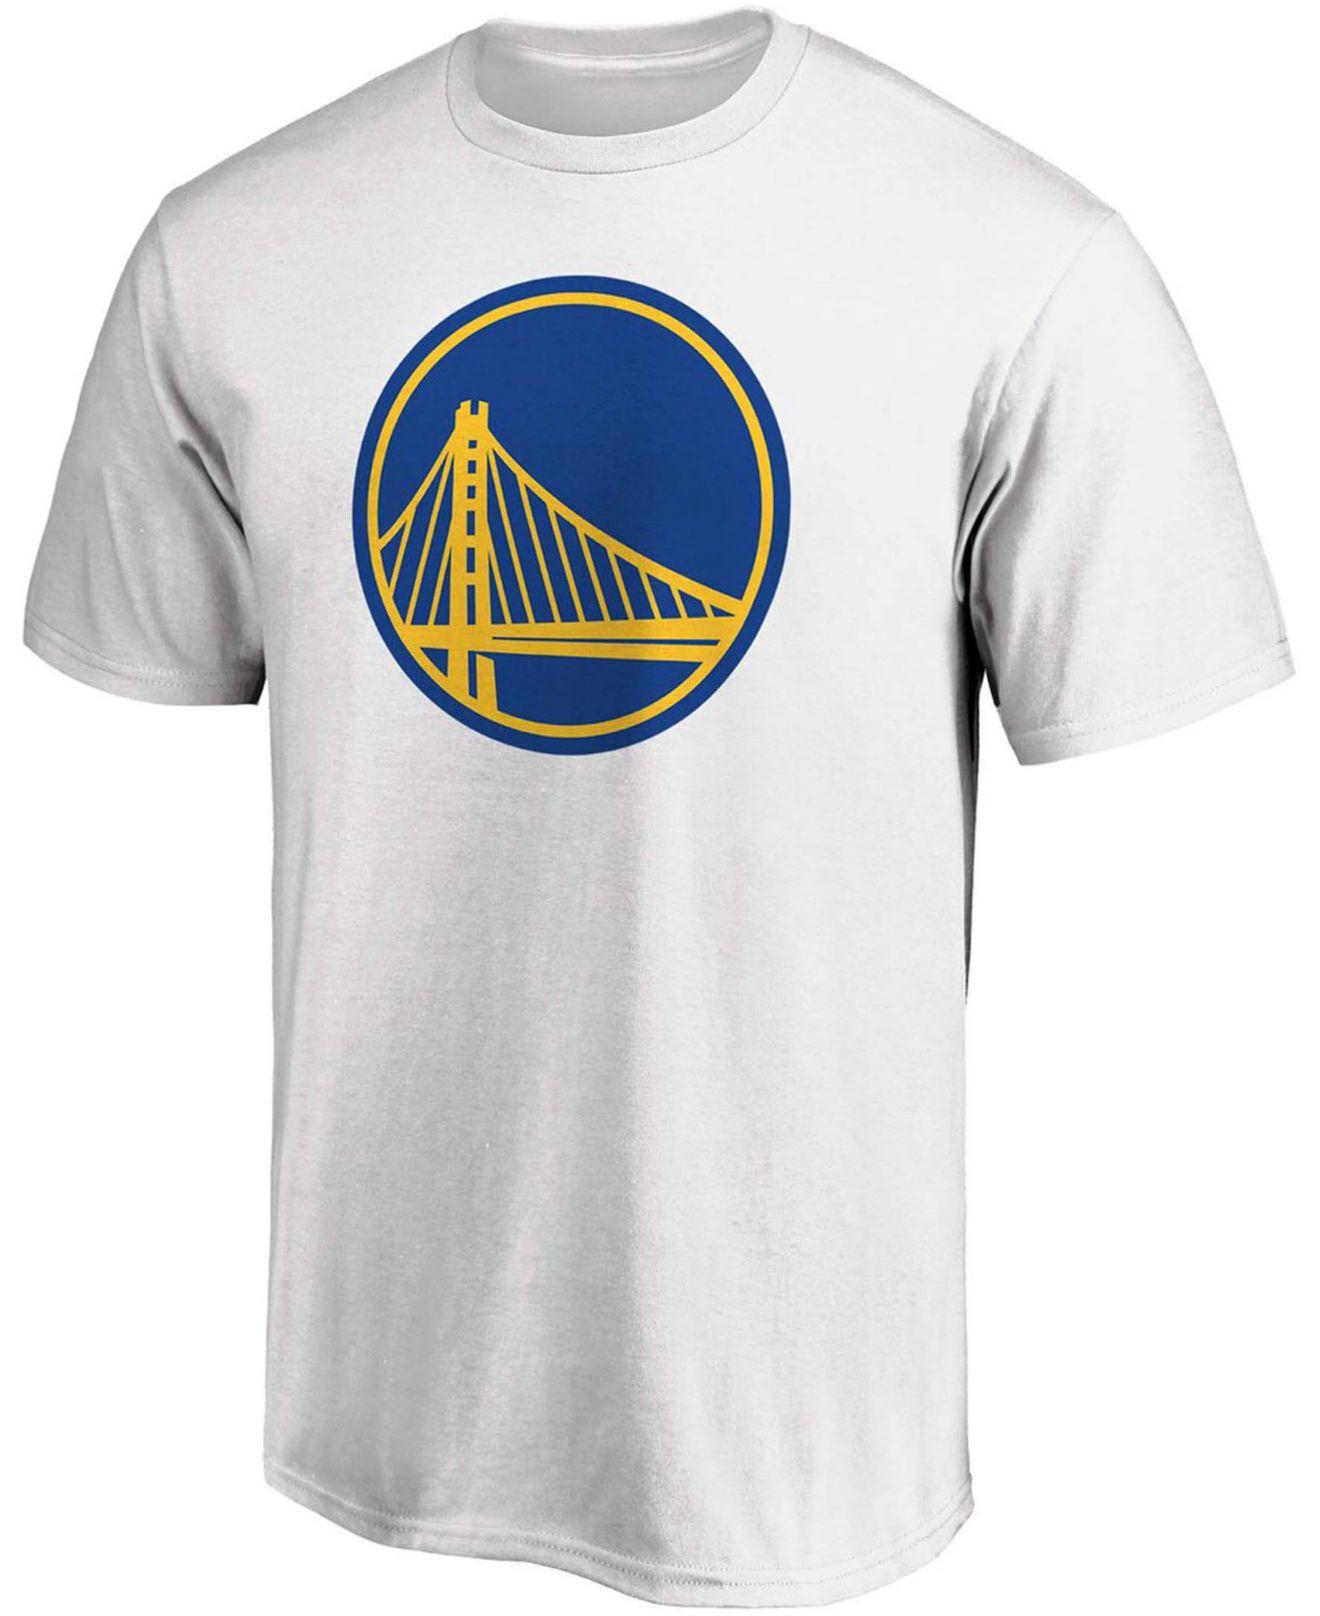 Fanatics Branded Royal/White Golden State Warriors Big & Tall Two-Pack T-Shirt Set